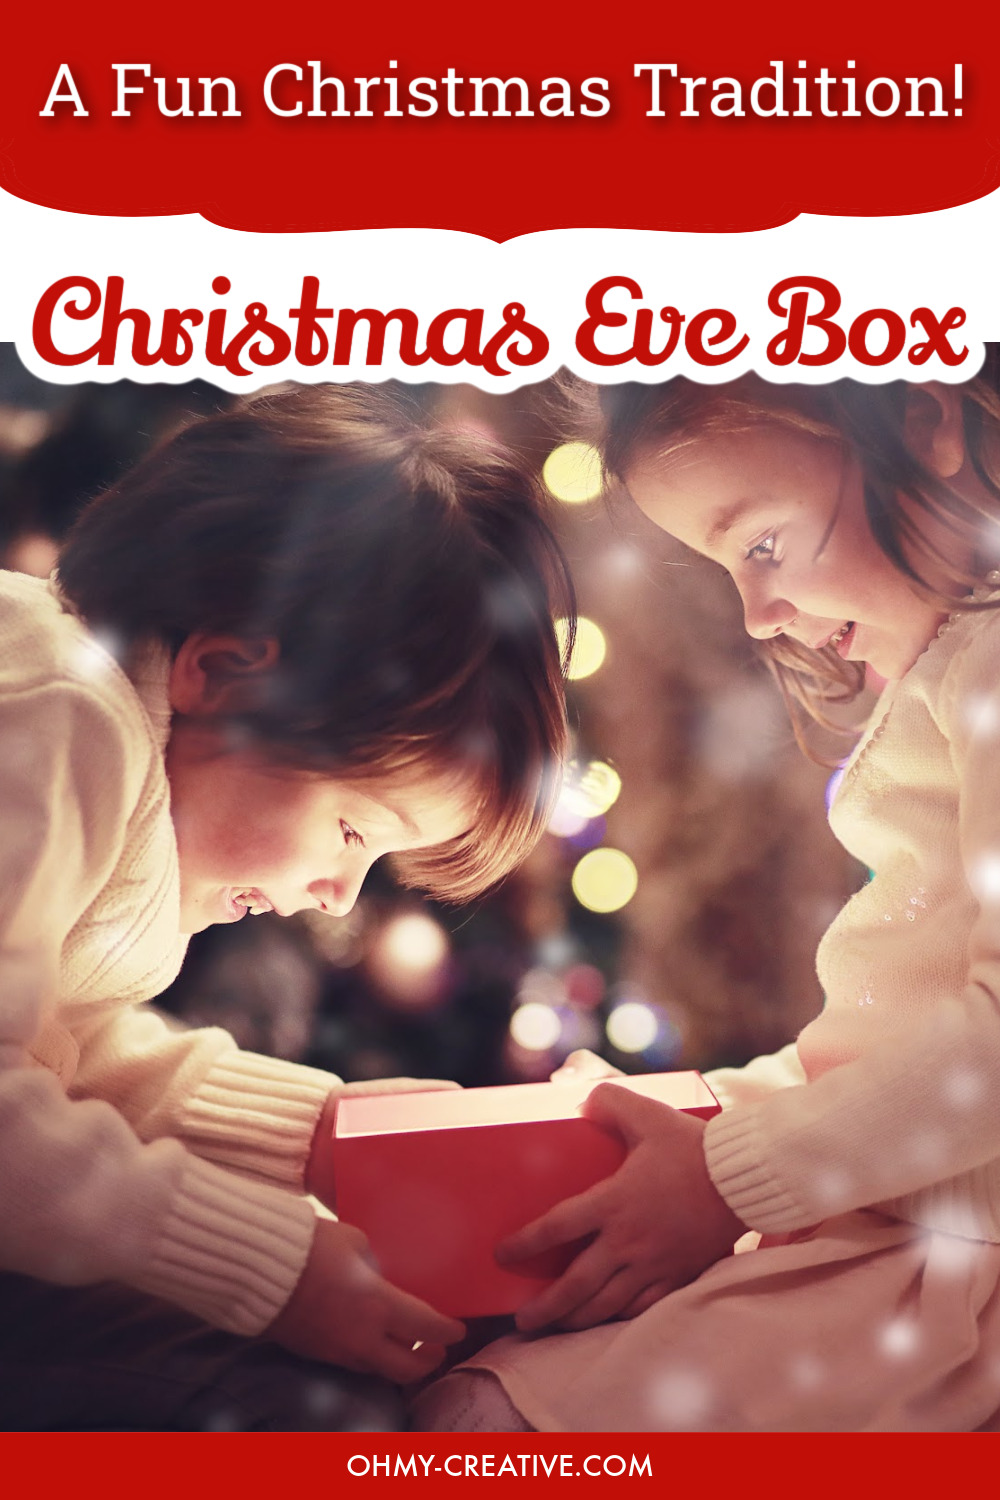 A young boy and girl looking into a Christmas Eve Box gift with excitement on their faces.